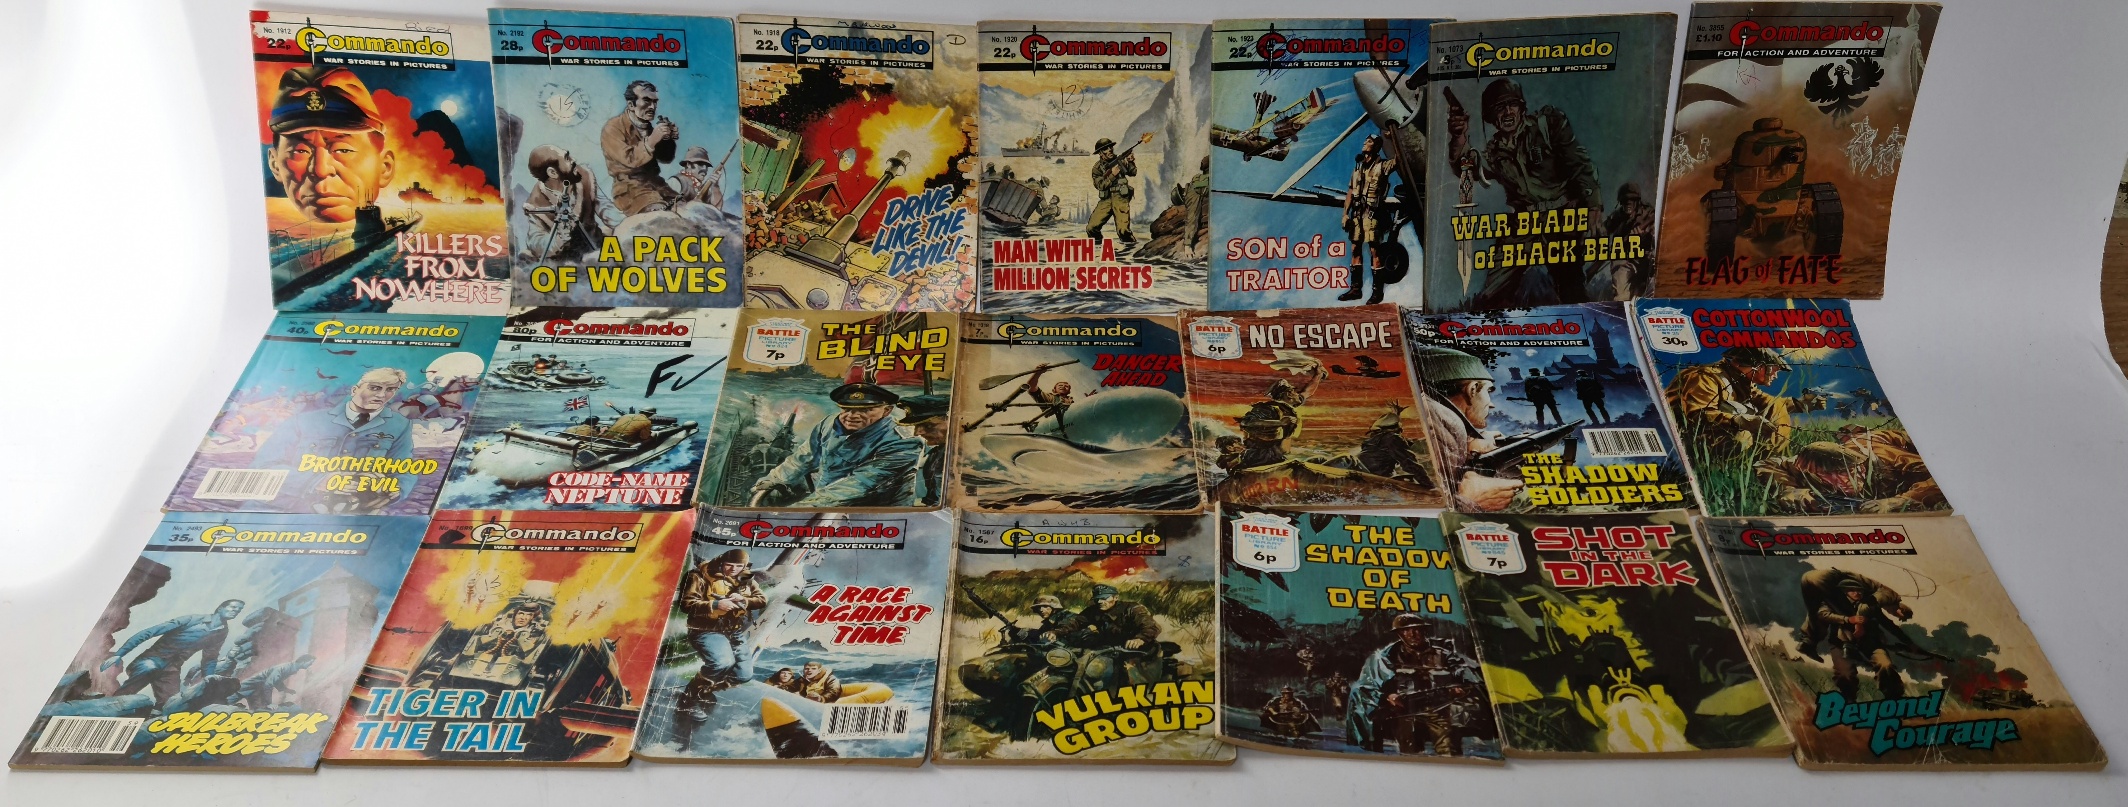 A collection of over 160 commando war comics. - Image 5 of 8